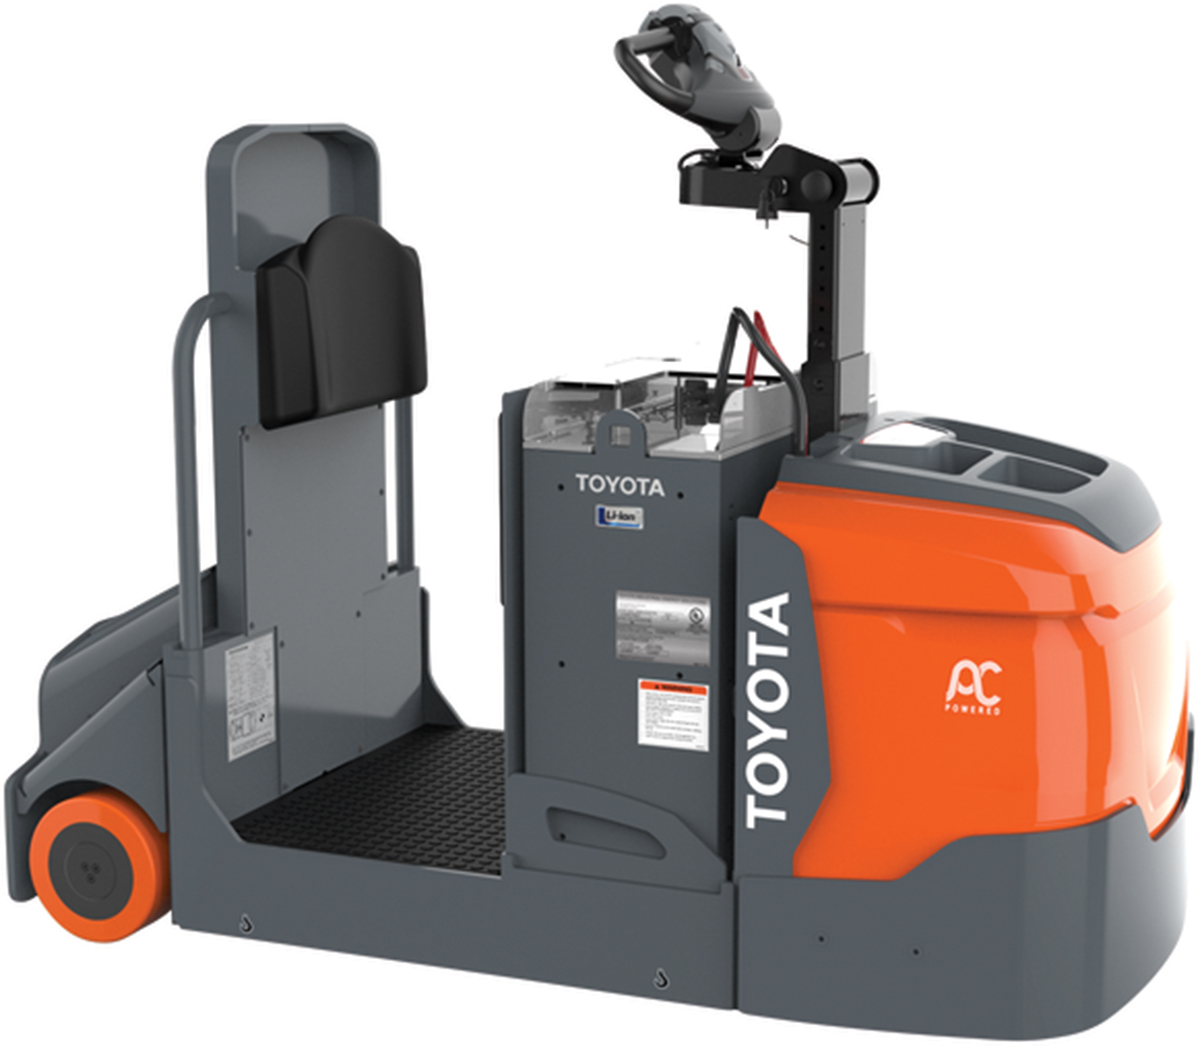 New electric forklift models with lift capacities up to 8,000 lbs. Optional features include cold storage conditioning and PIN code access.